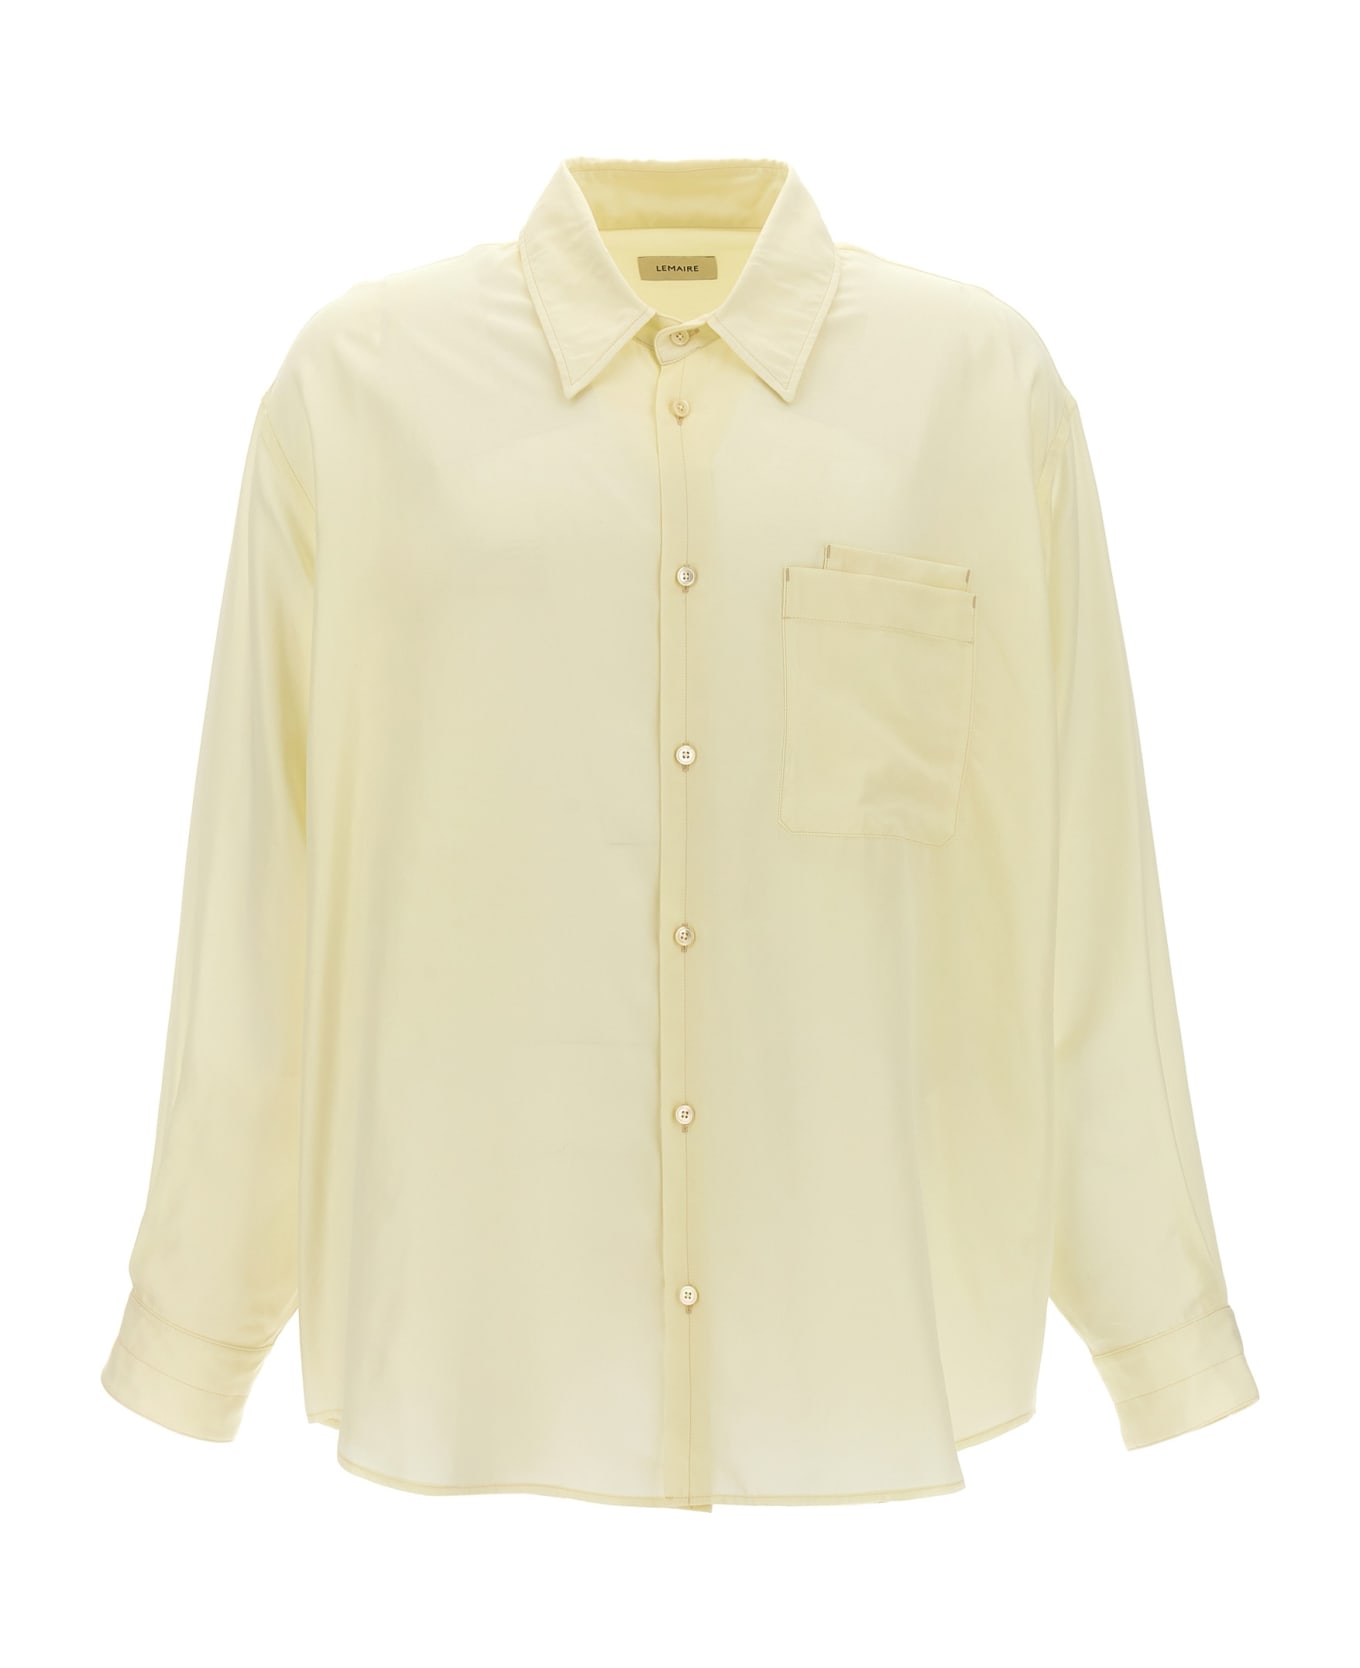 Lemaire 'double Pocket' Shirt - White シャツ